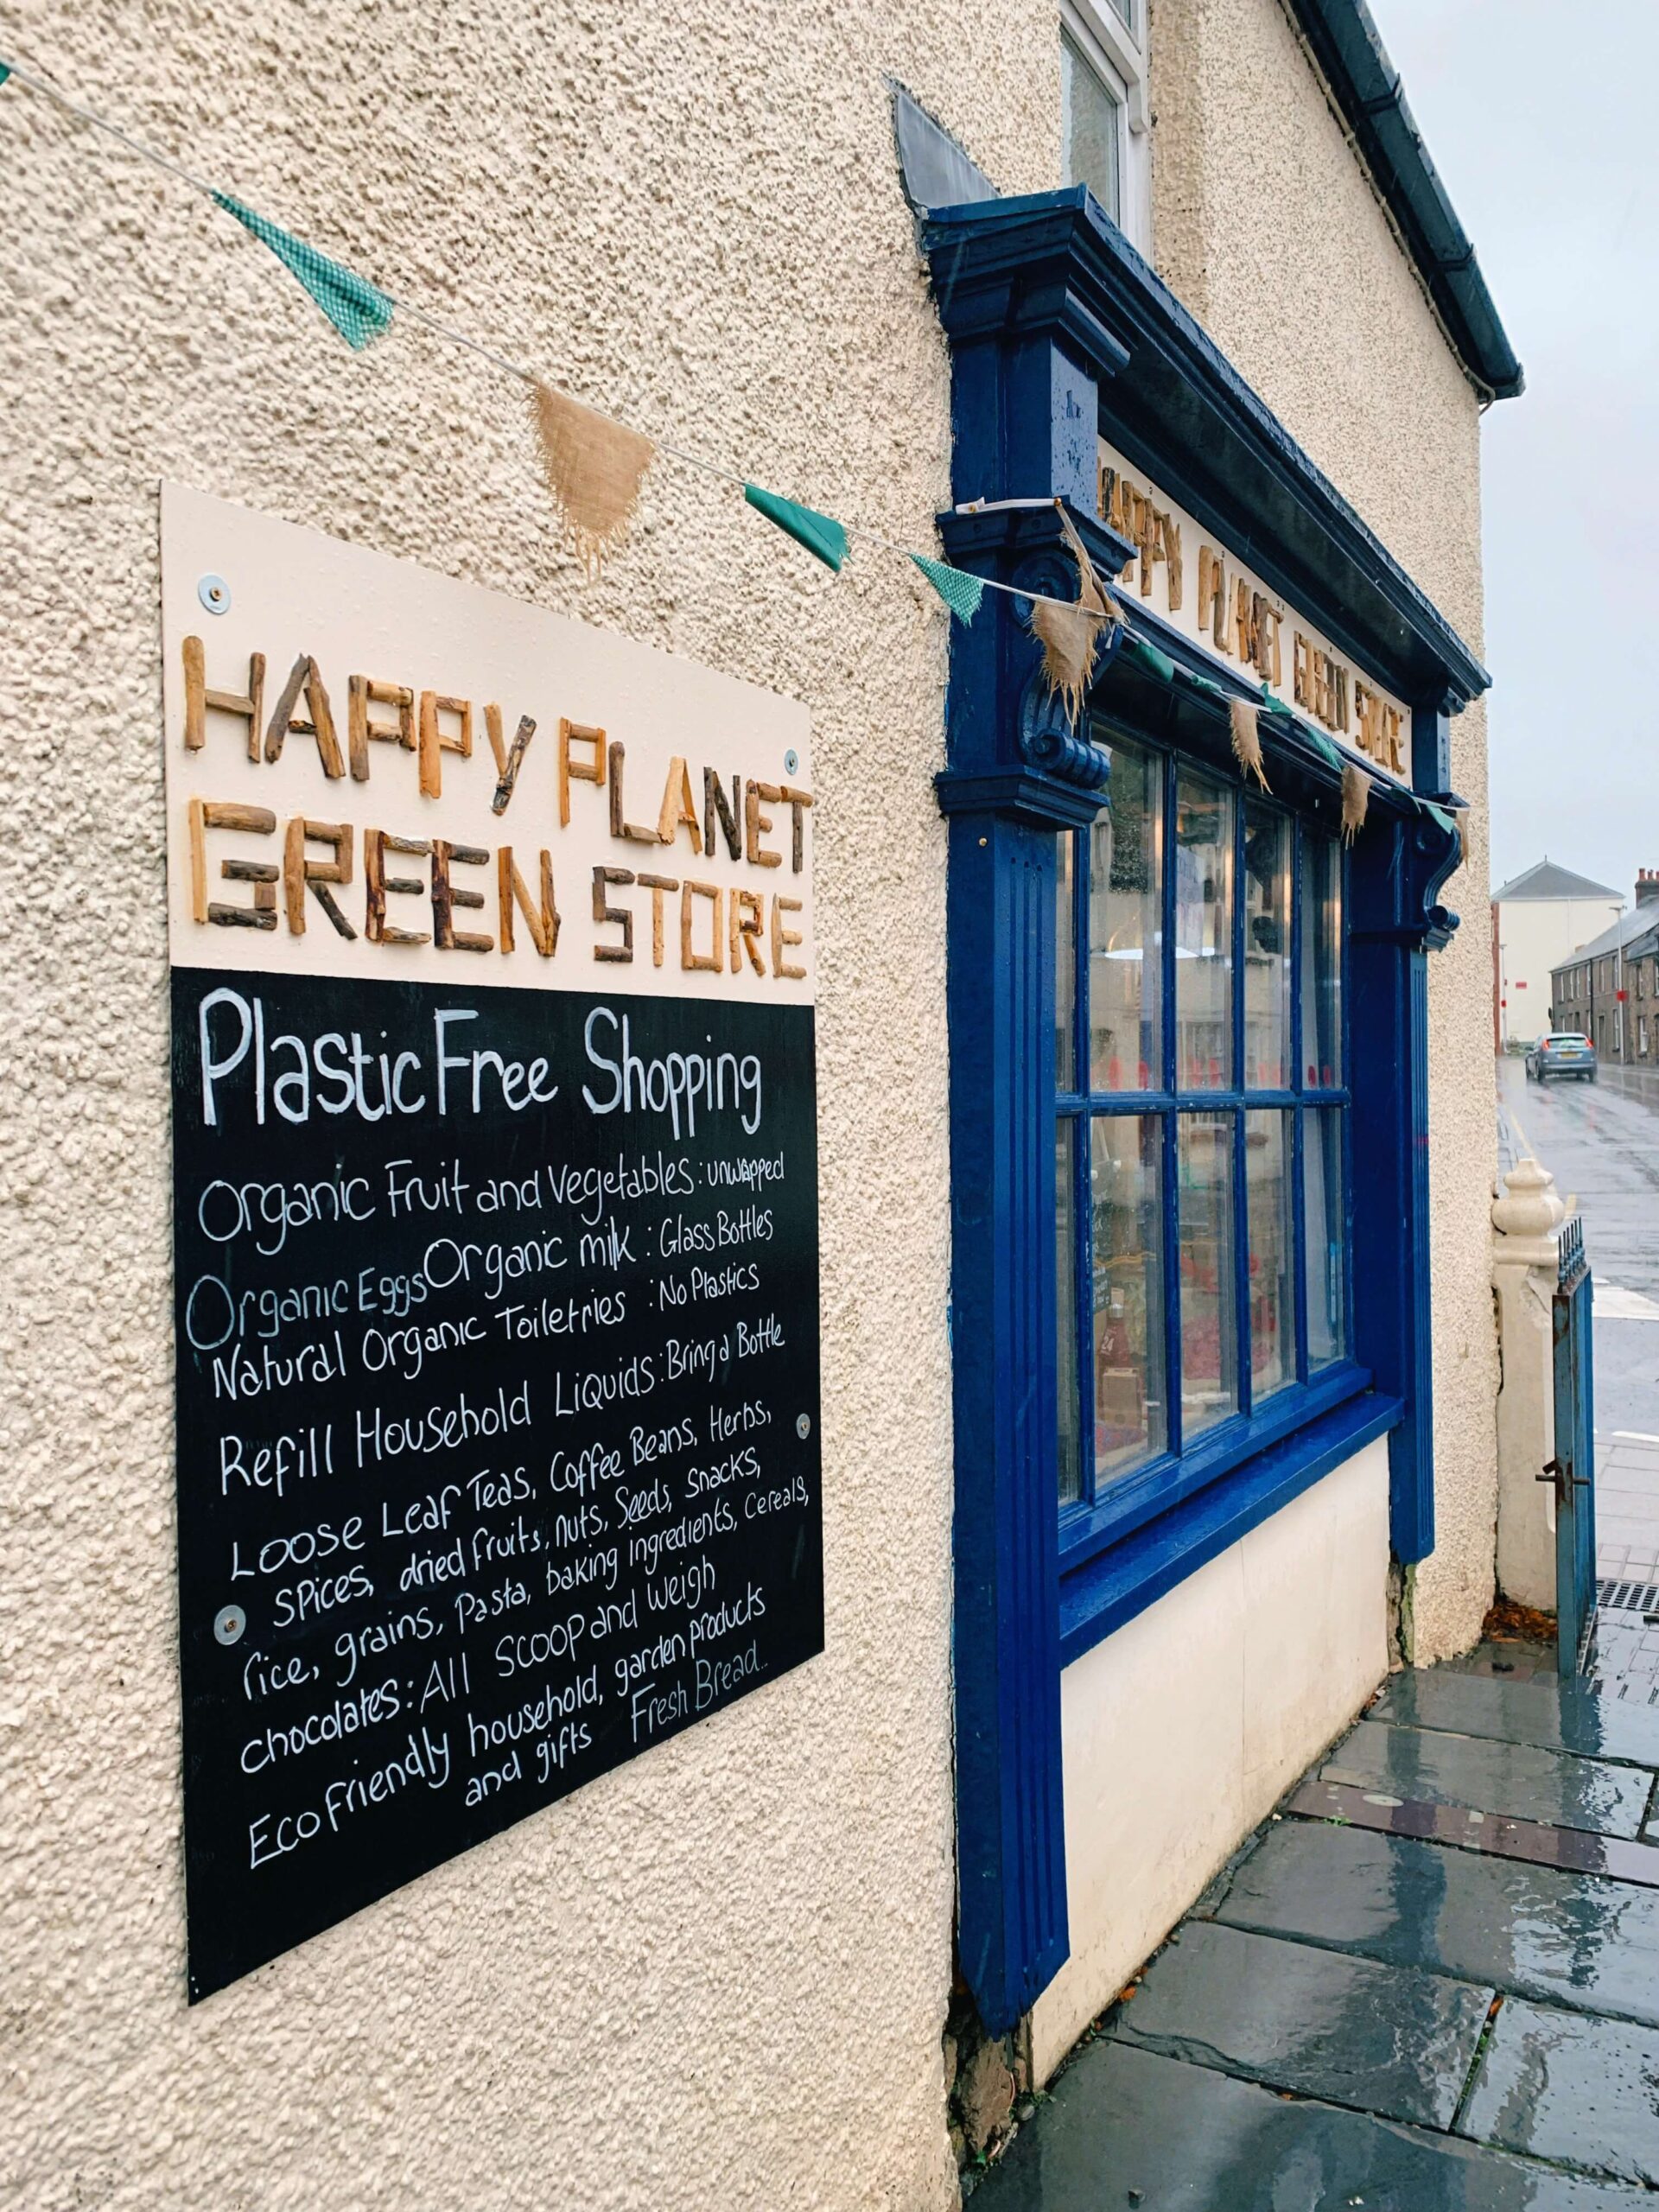 Happy Planet Green Store, Narberth